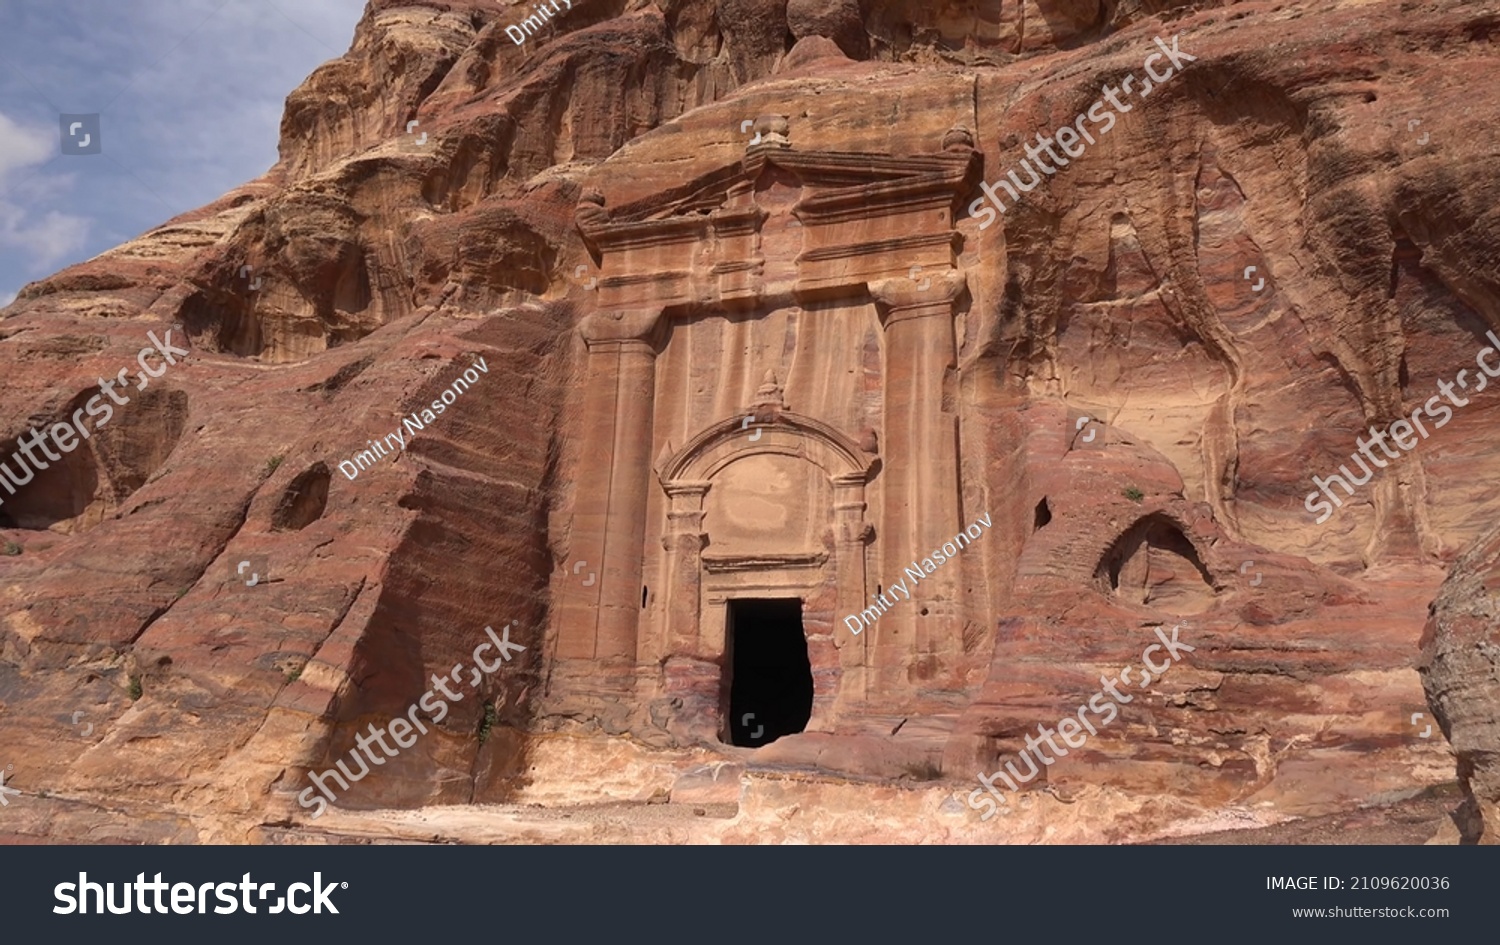 High Place of Sacrifice Trail in Petra - Jordan, World Heritage Site #2109620036